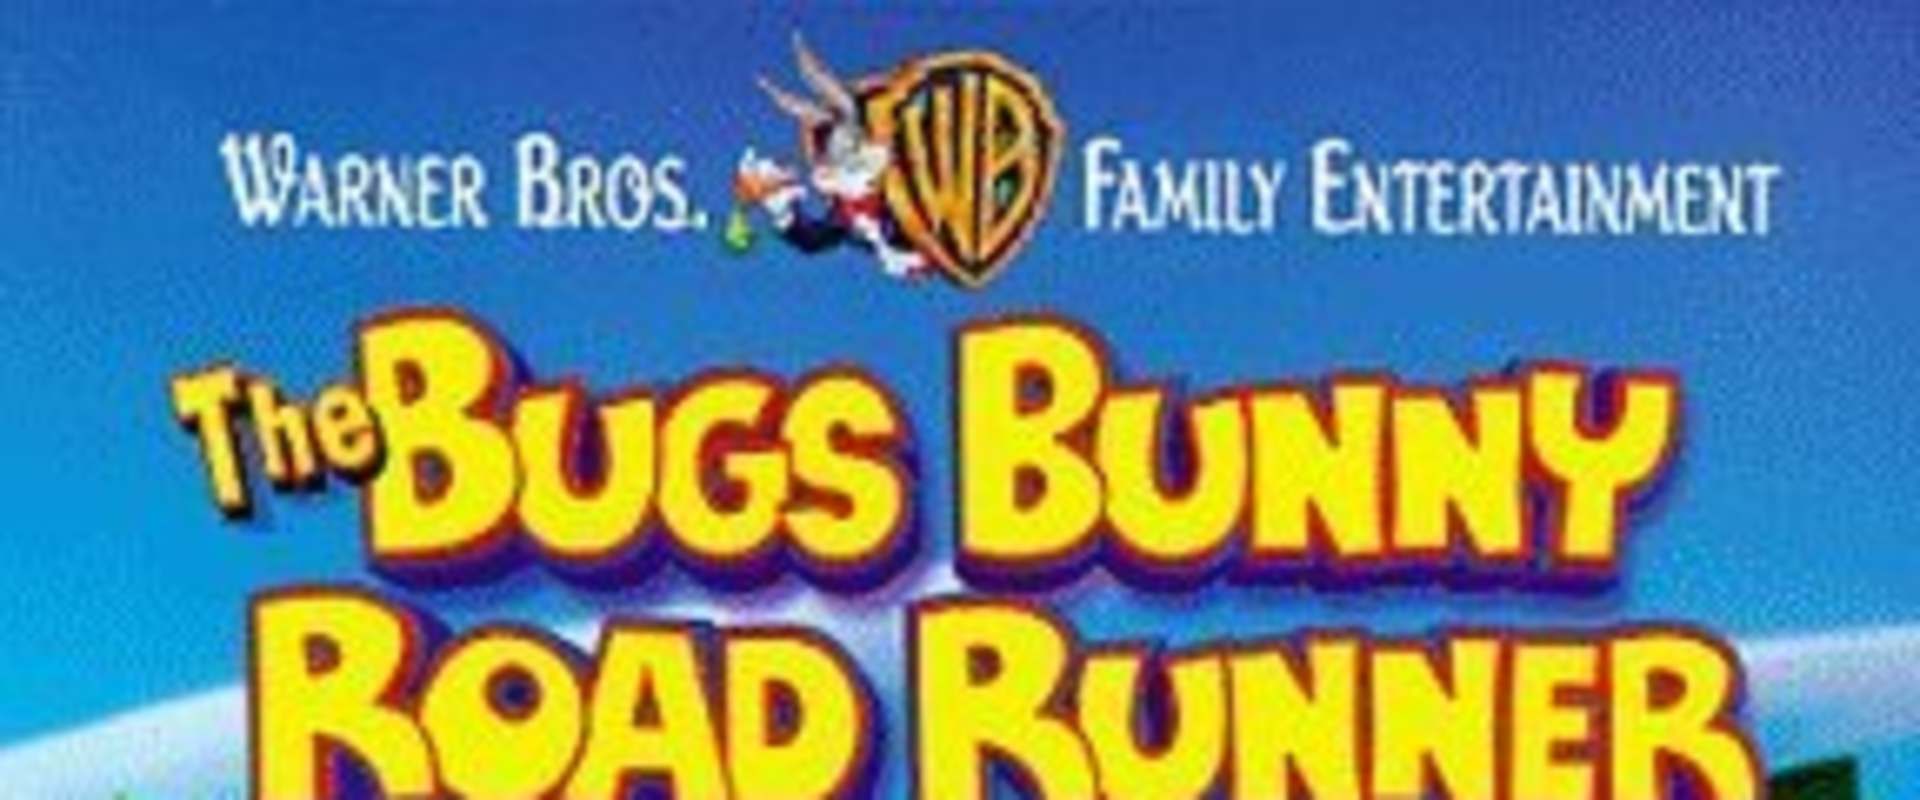 The Bugs Bunny/Road-Runner Movie background 2